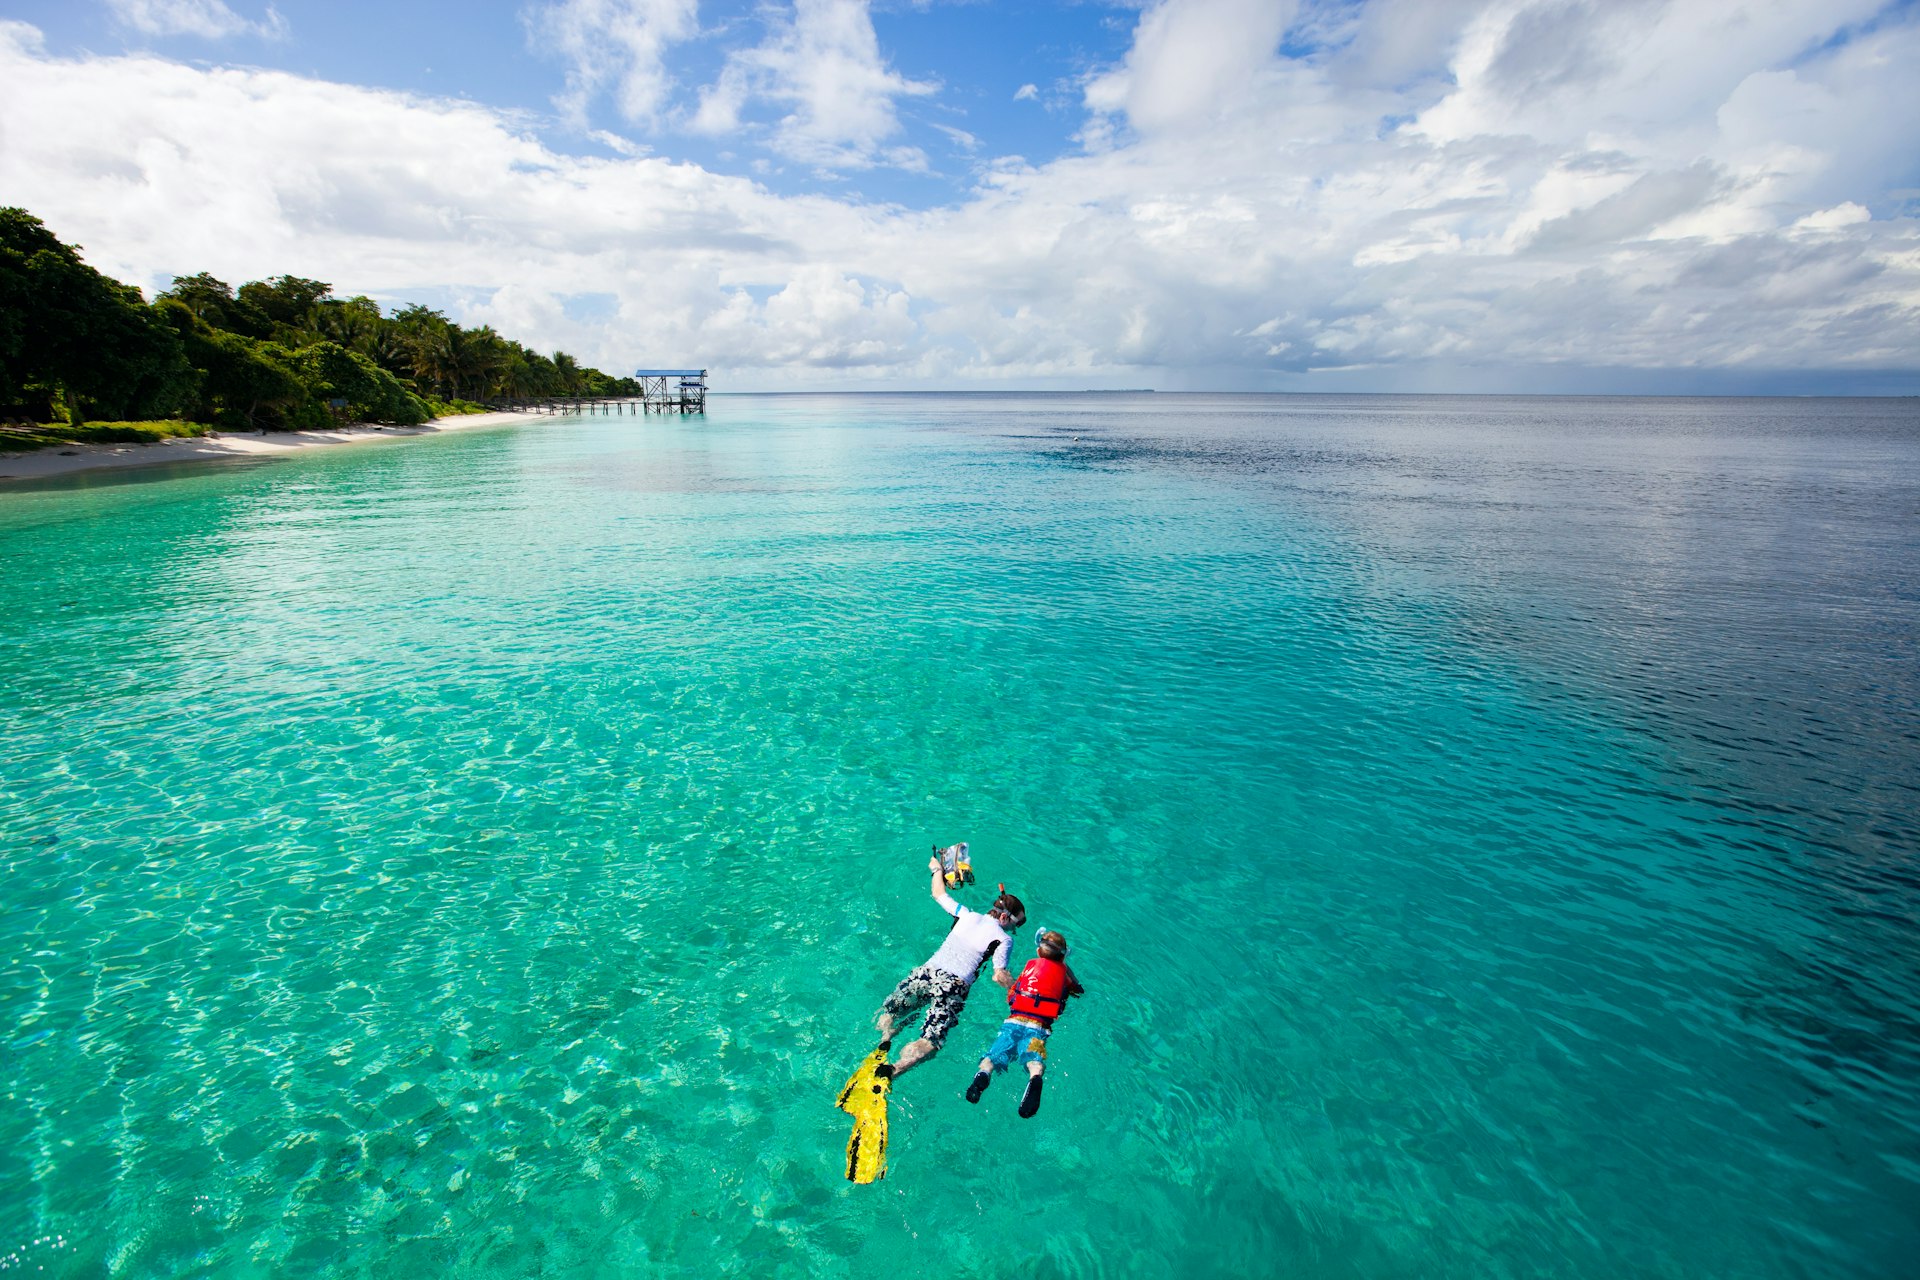 An aerial shot of an adult and child snorkeling in crystal clear water. The land is to their left, covered in vegetation.